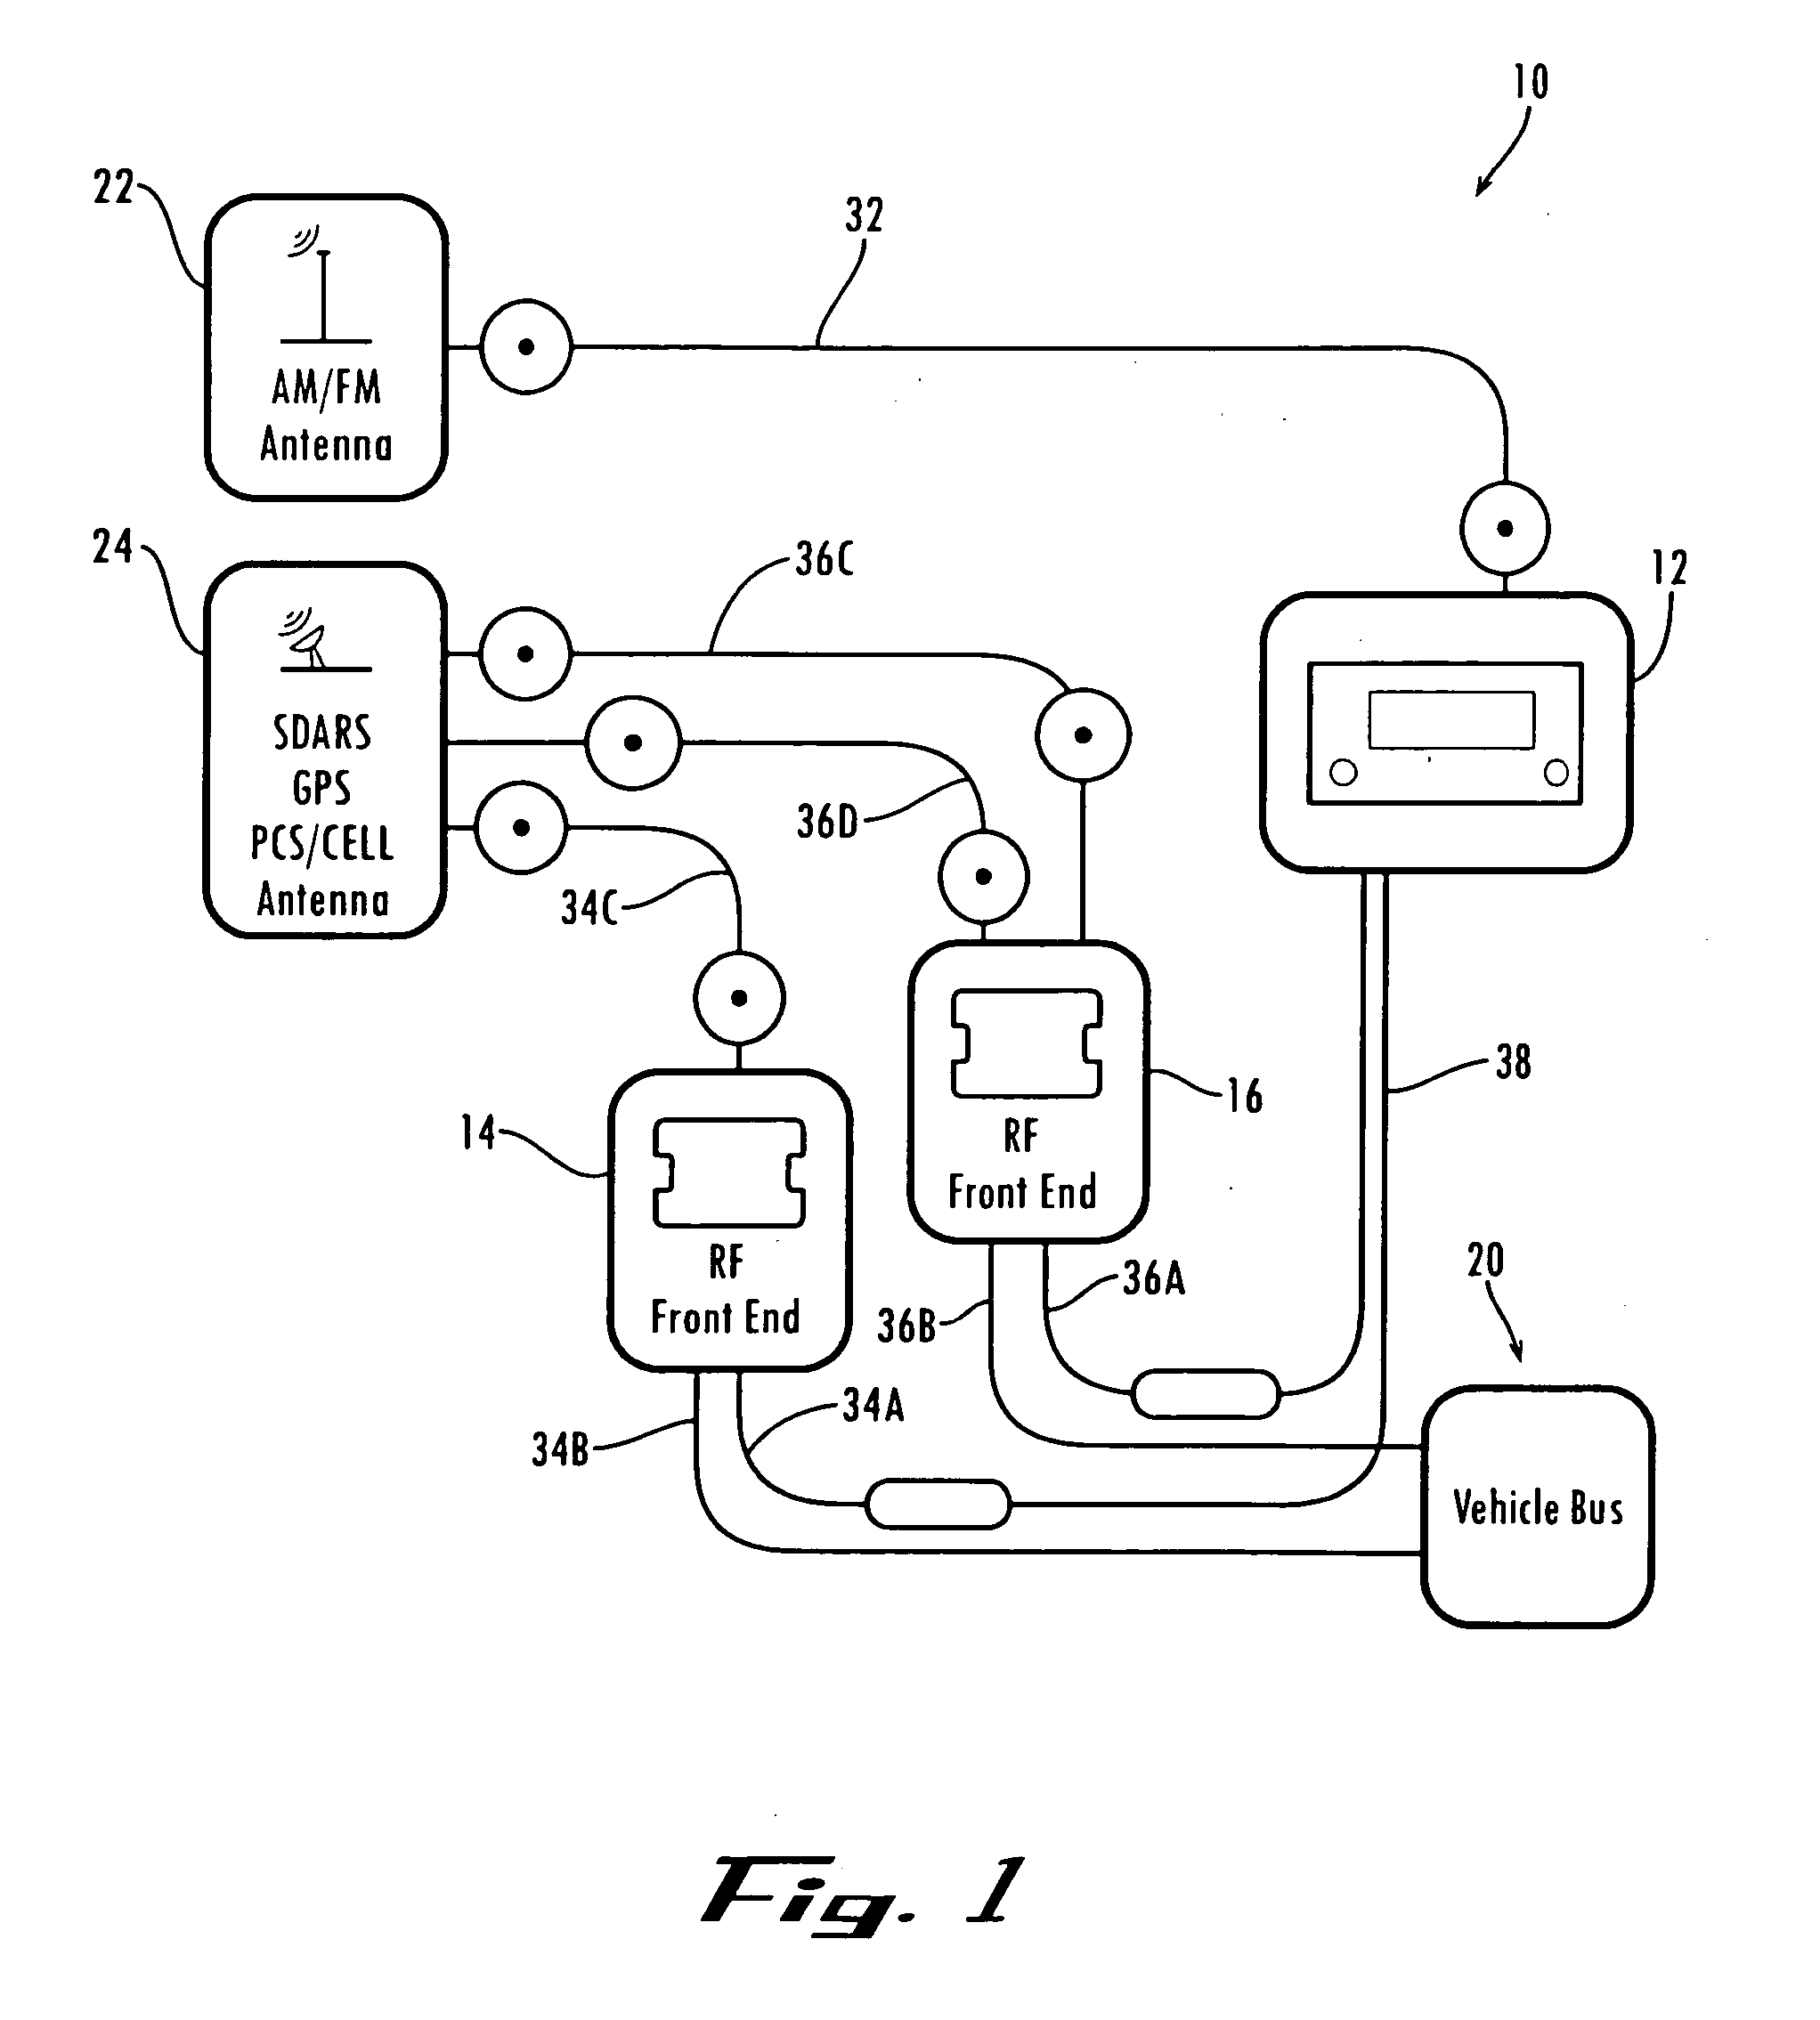 Apparatus having and method for implementing a distributed architecture for receiving and/or transmitting radio frequency signals